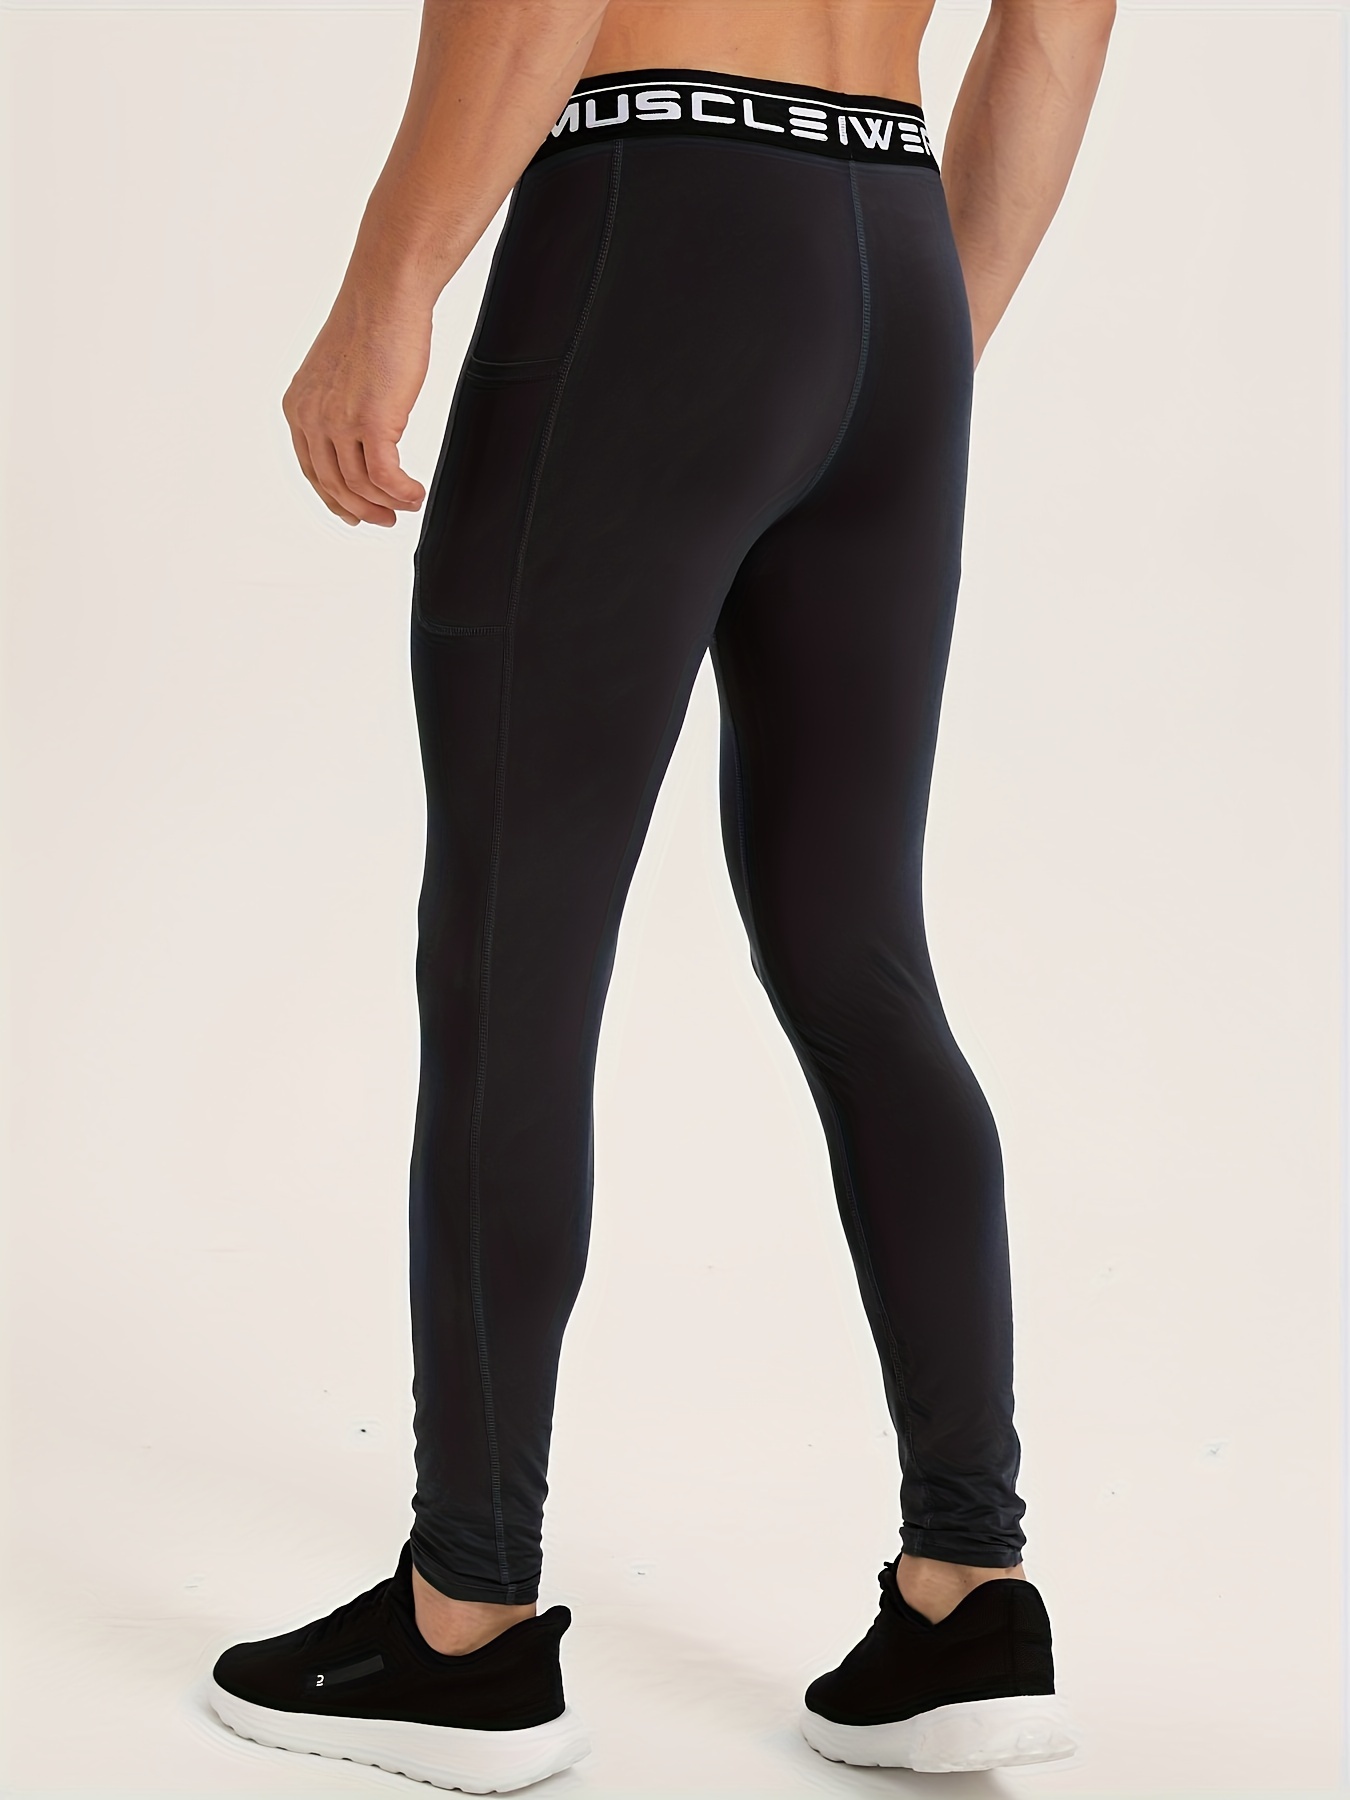 Compression Leggings with Pockets